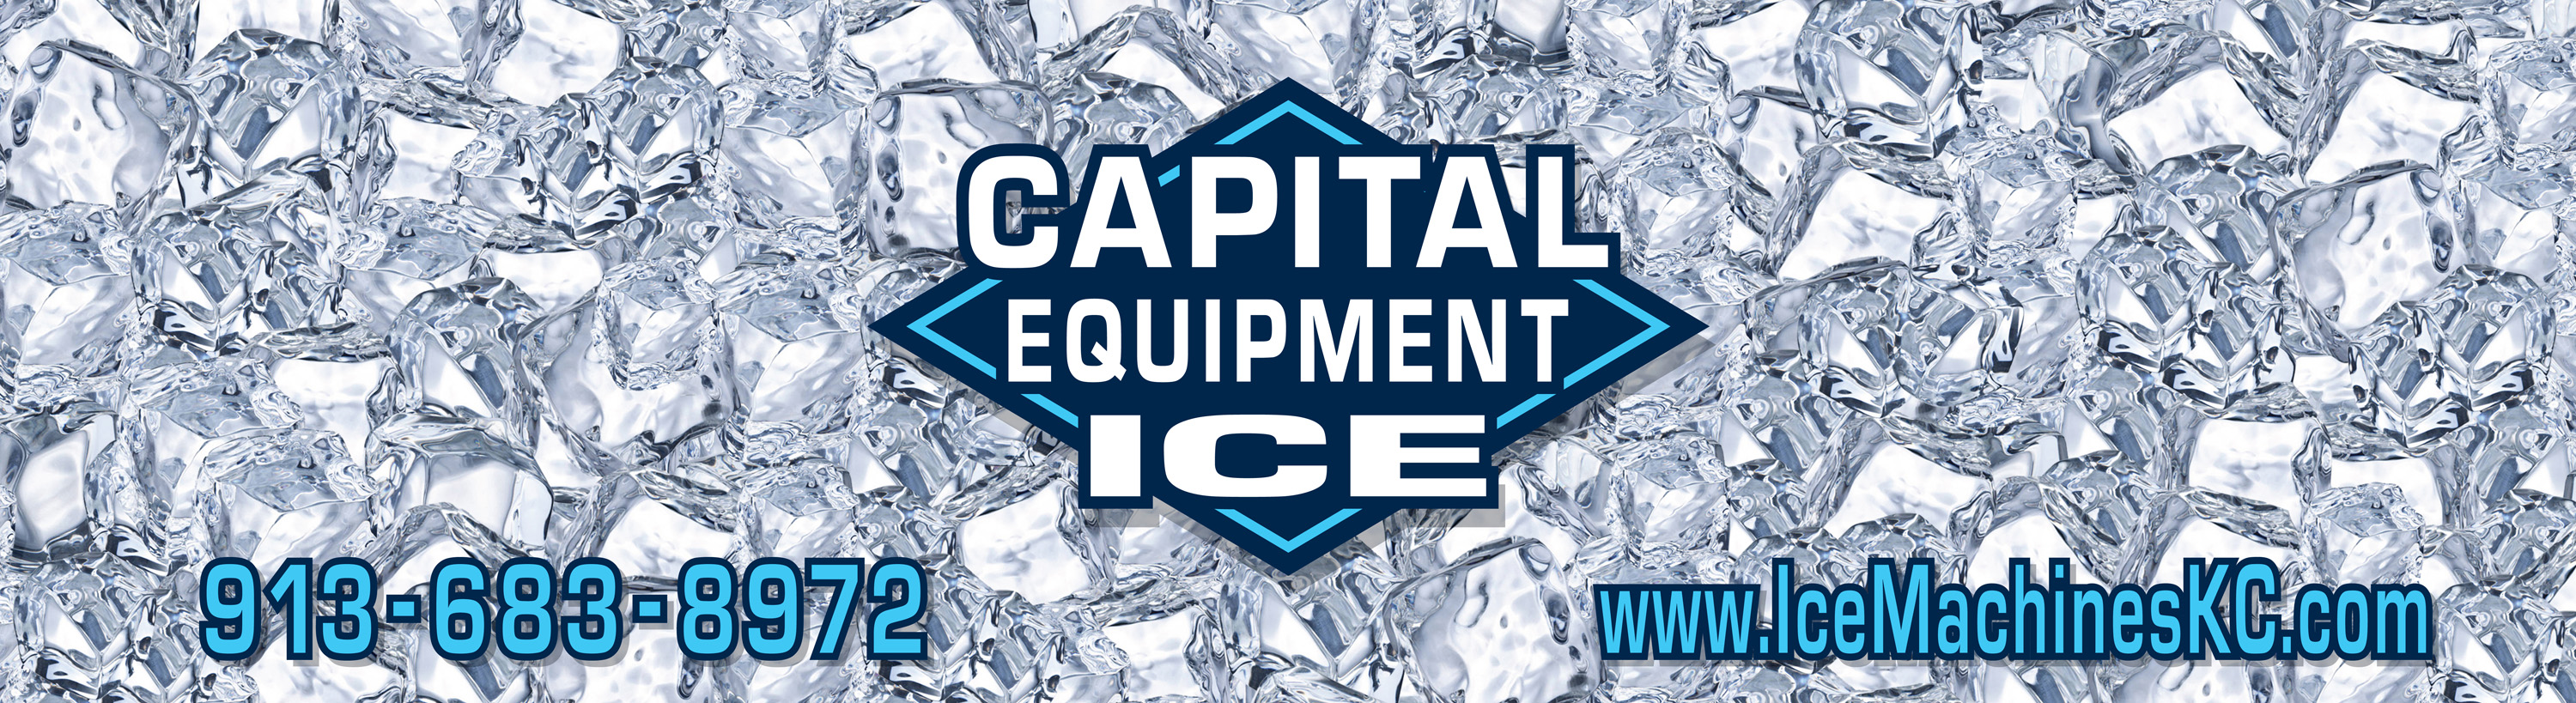 Capital-Equipment-Commercial-Ice-Machines